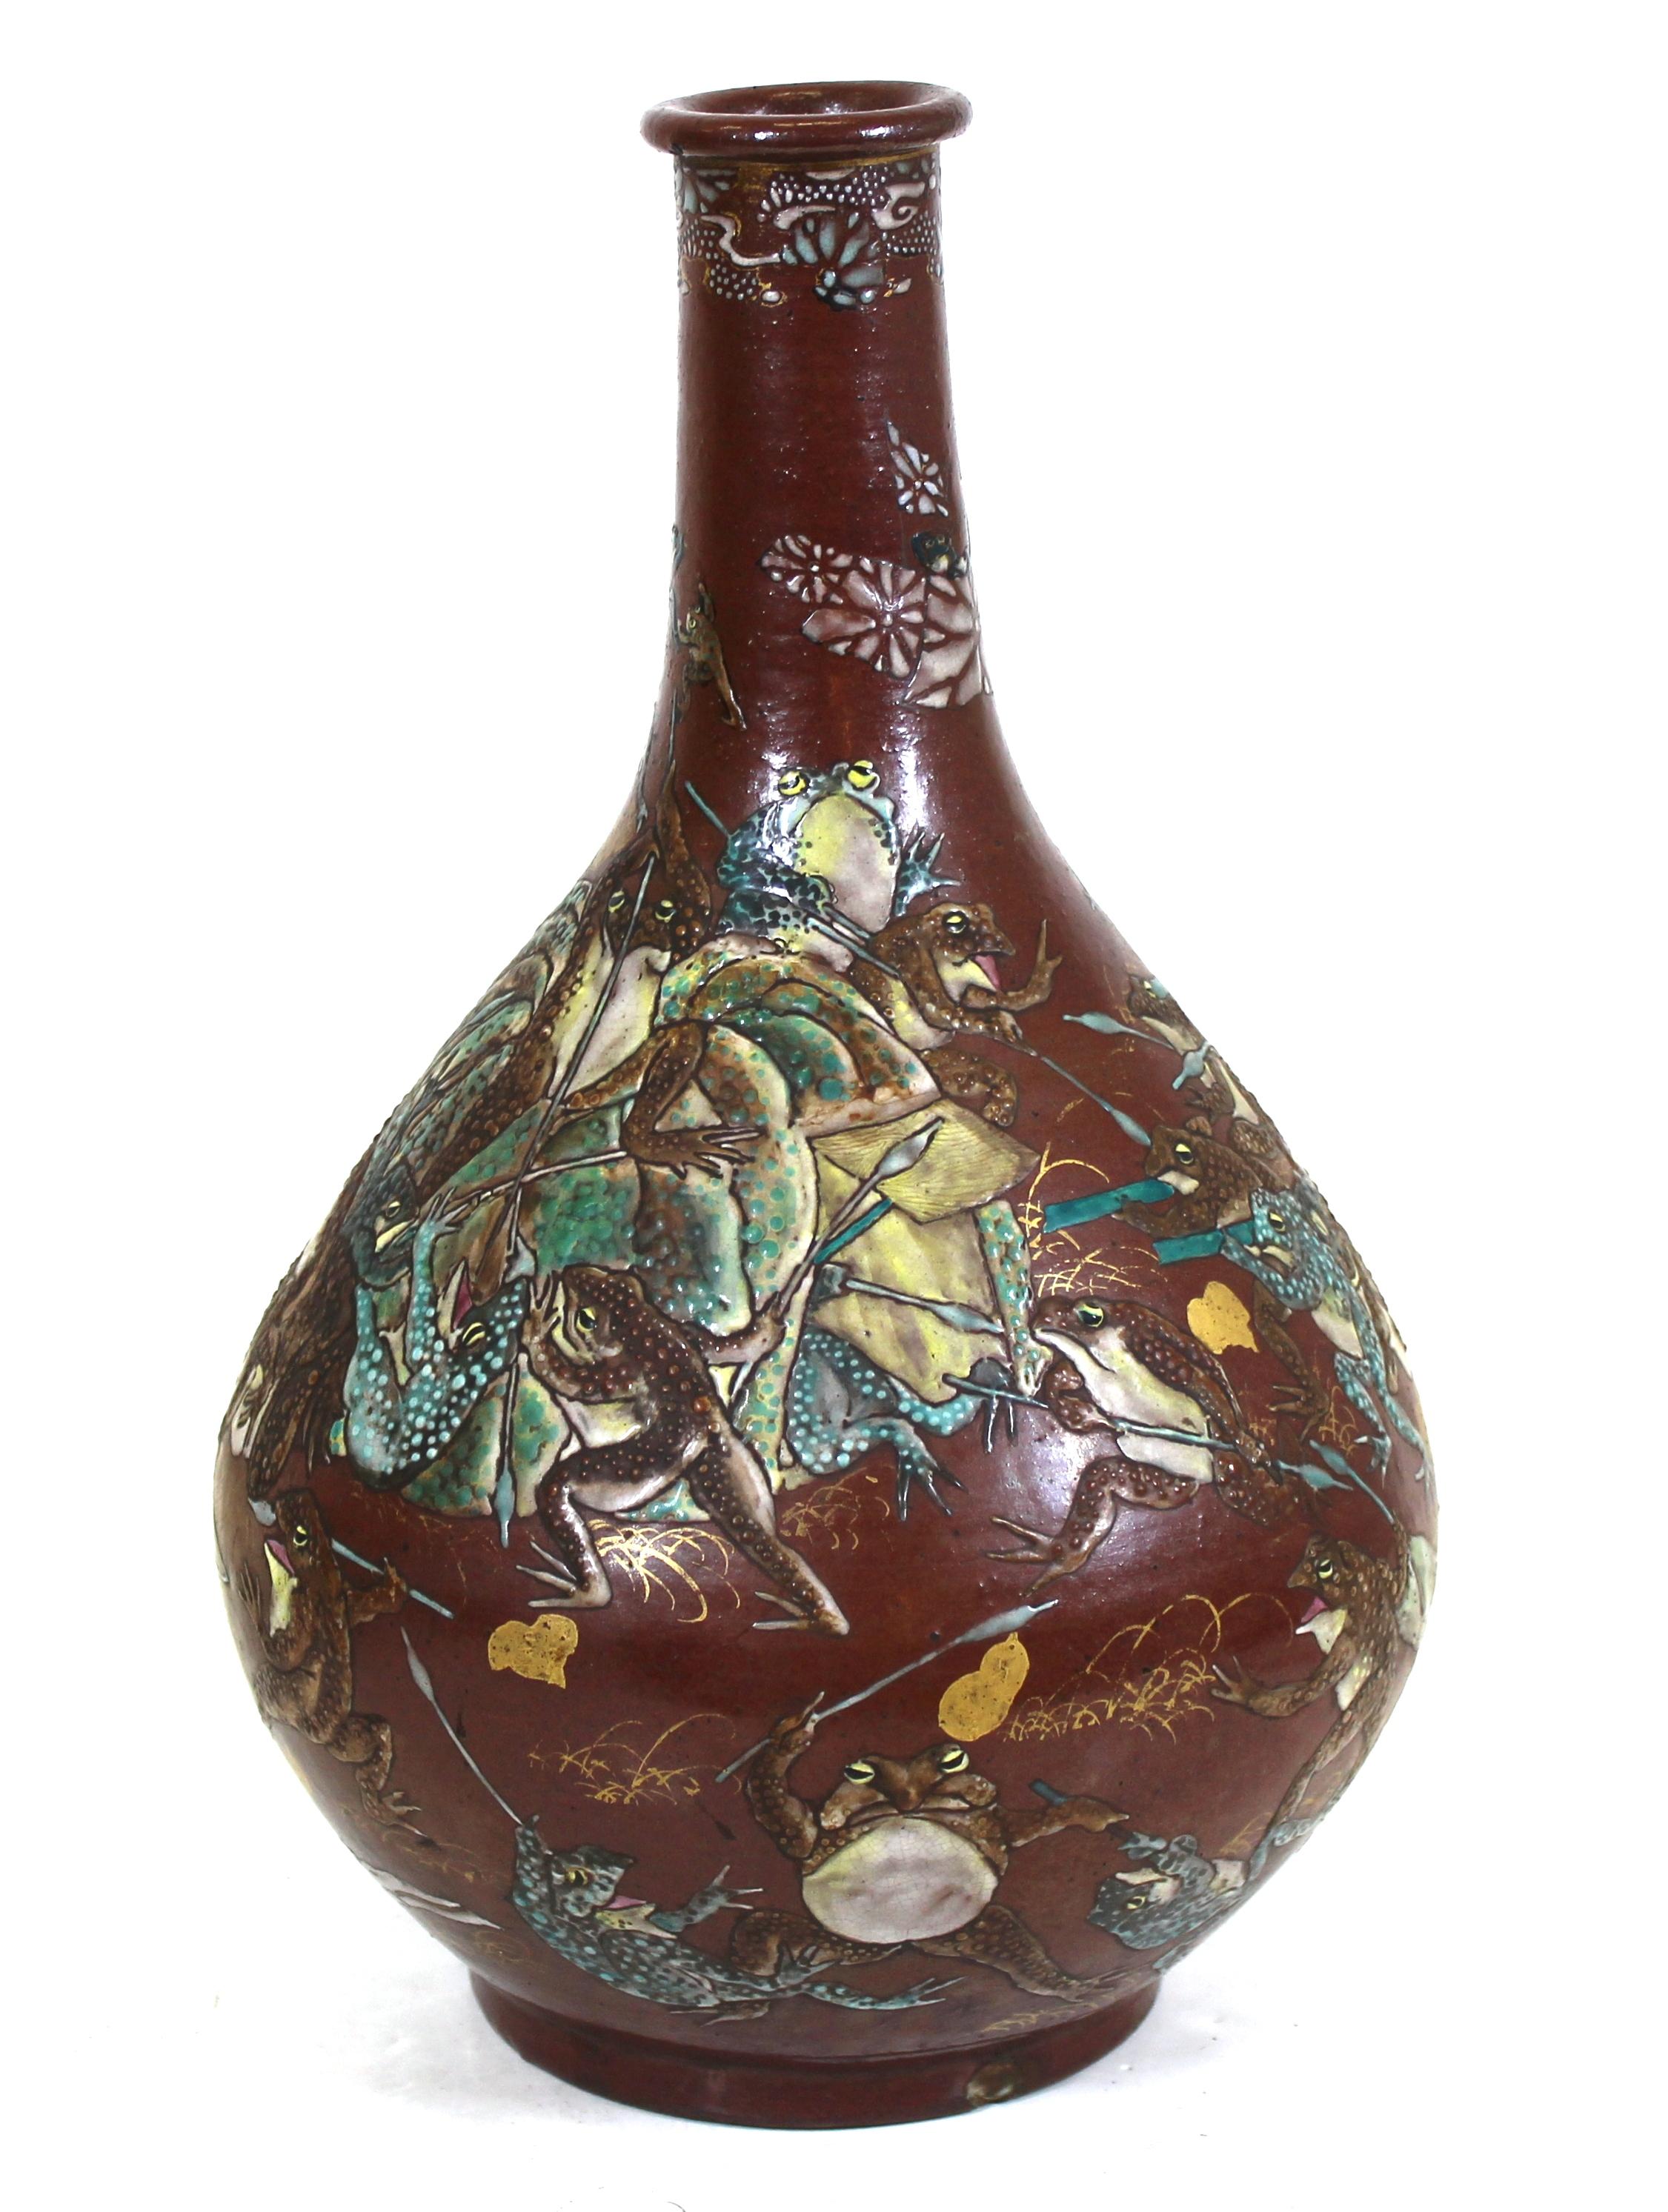 Japanese Meiji period satsuma vase depicting a colorful frieze of frogs at war, parcel gilt, with mark on bottom.